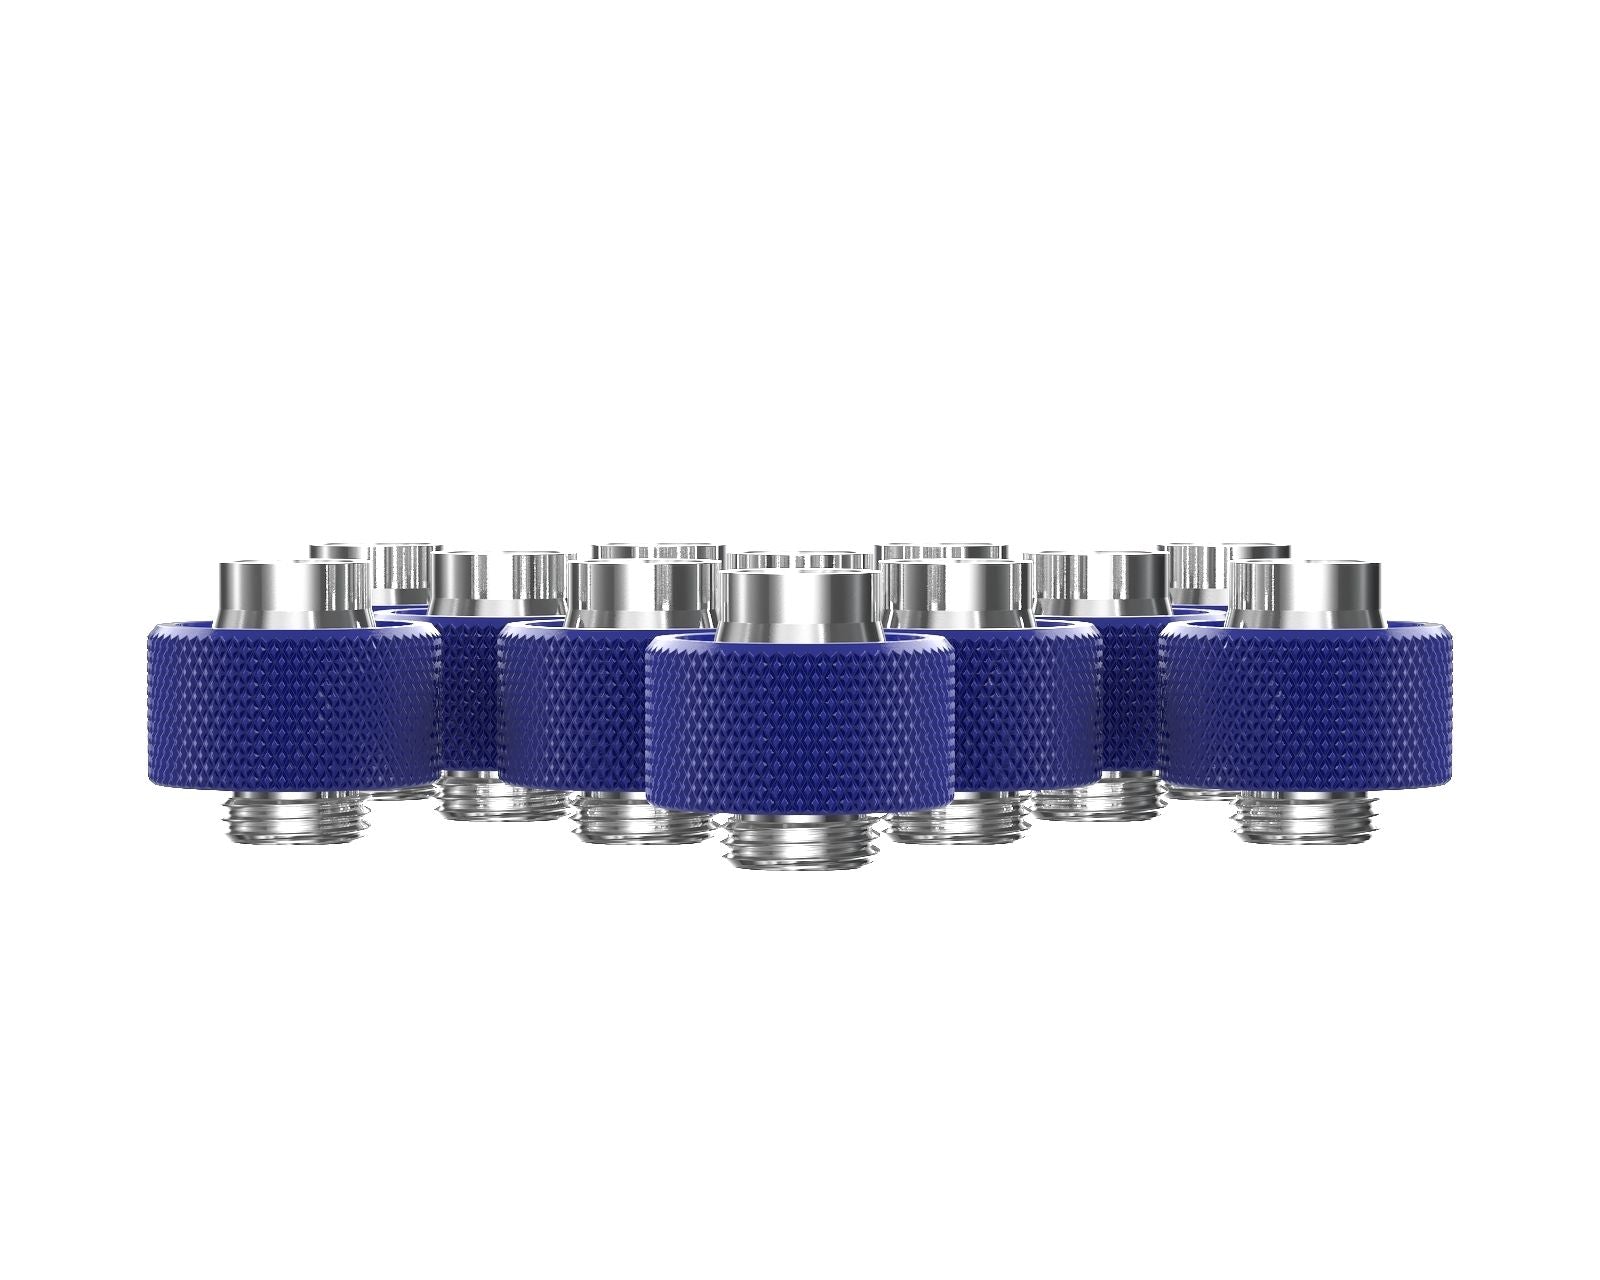 PrimoChill SecureFit SX - Premium Compression Fittings 12 Pack - For 1/2in ID x 3/4in OD Flexible Tubing (F-SFSX34-12) - Available in 20+ Colors, Custom Watercooling Loop Ready - True Blue